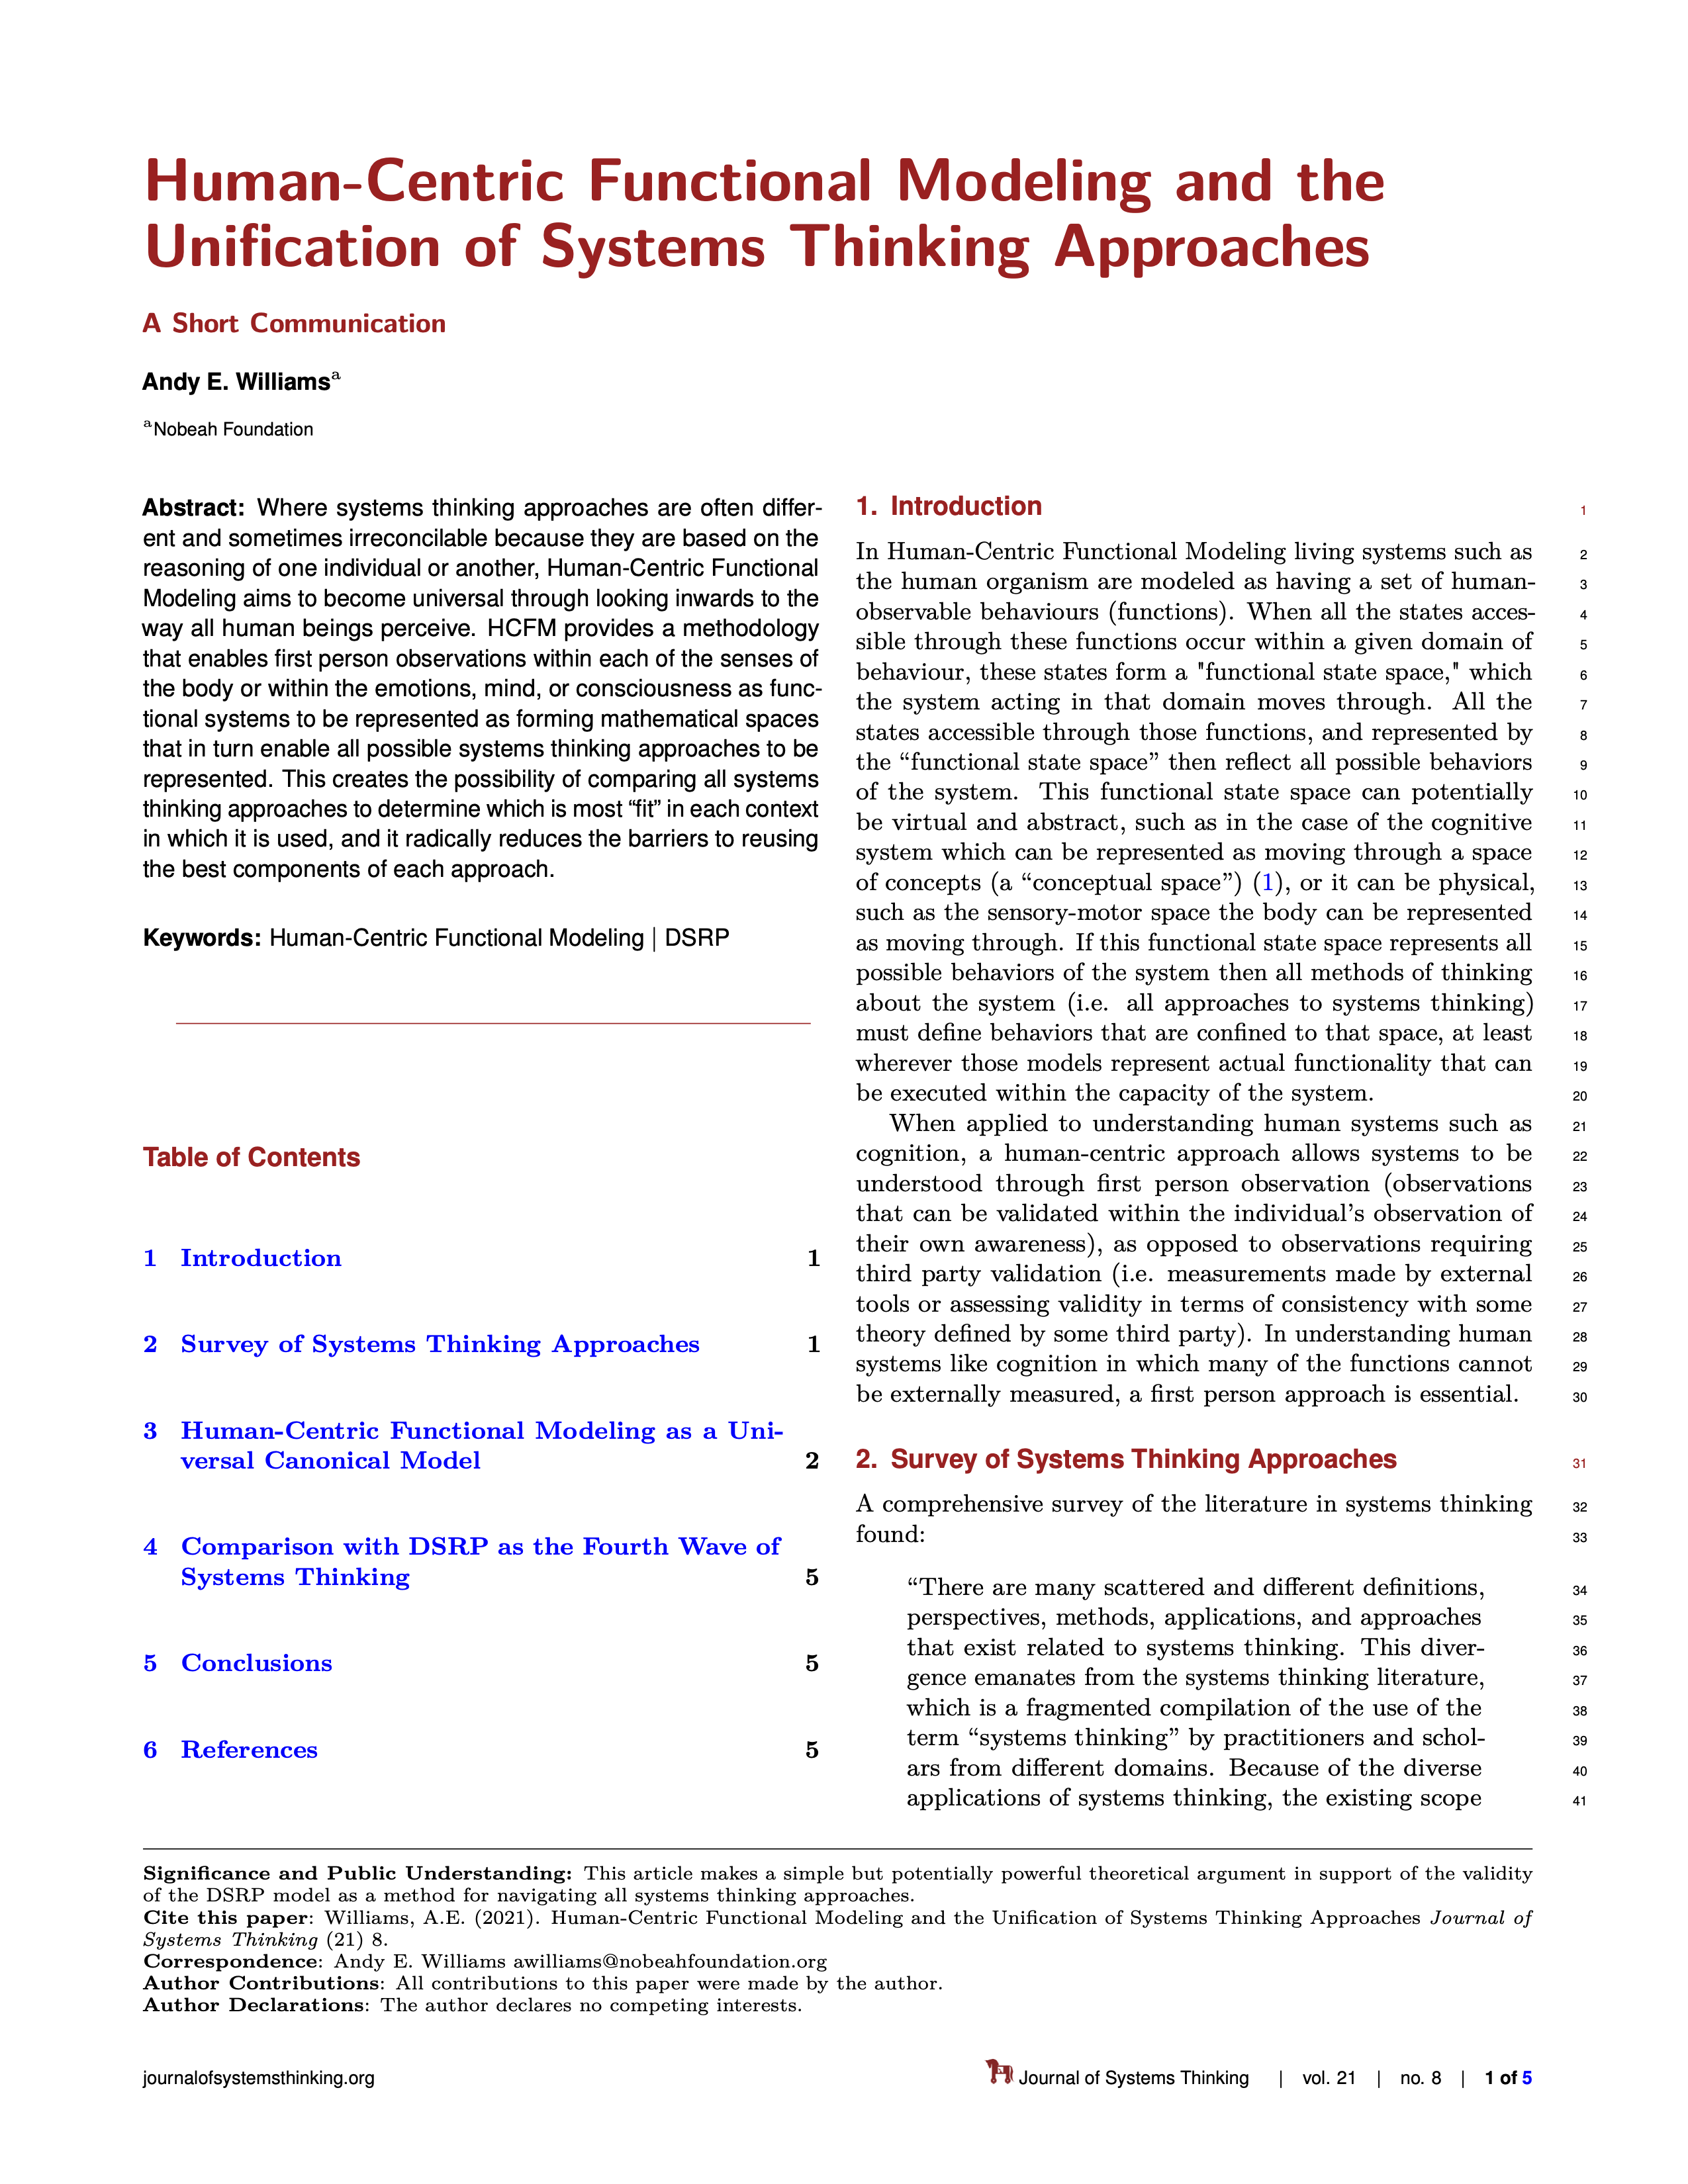 Human-Centric Functional Modeling and the Unification of Systems Thinking Approaches by Williams